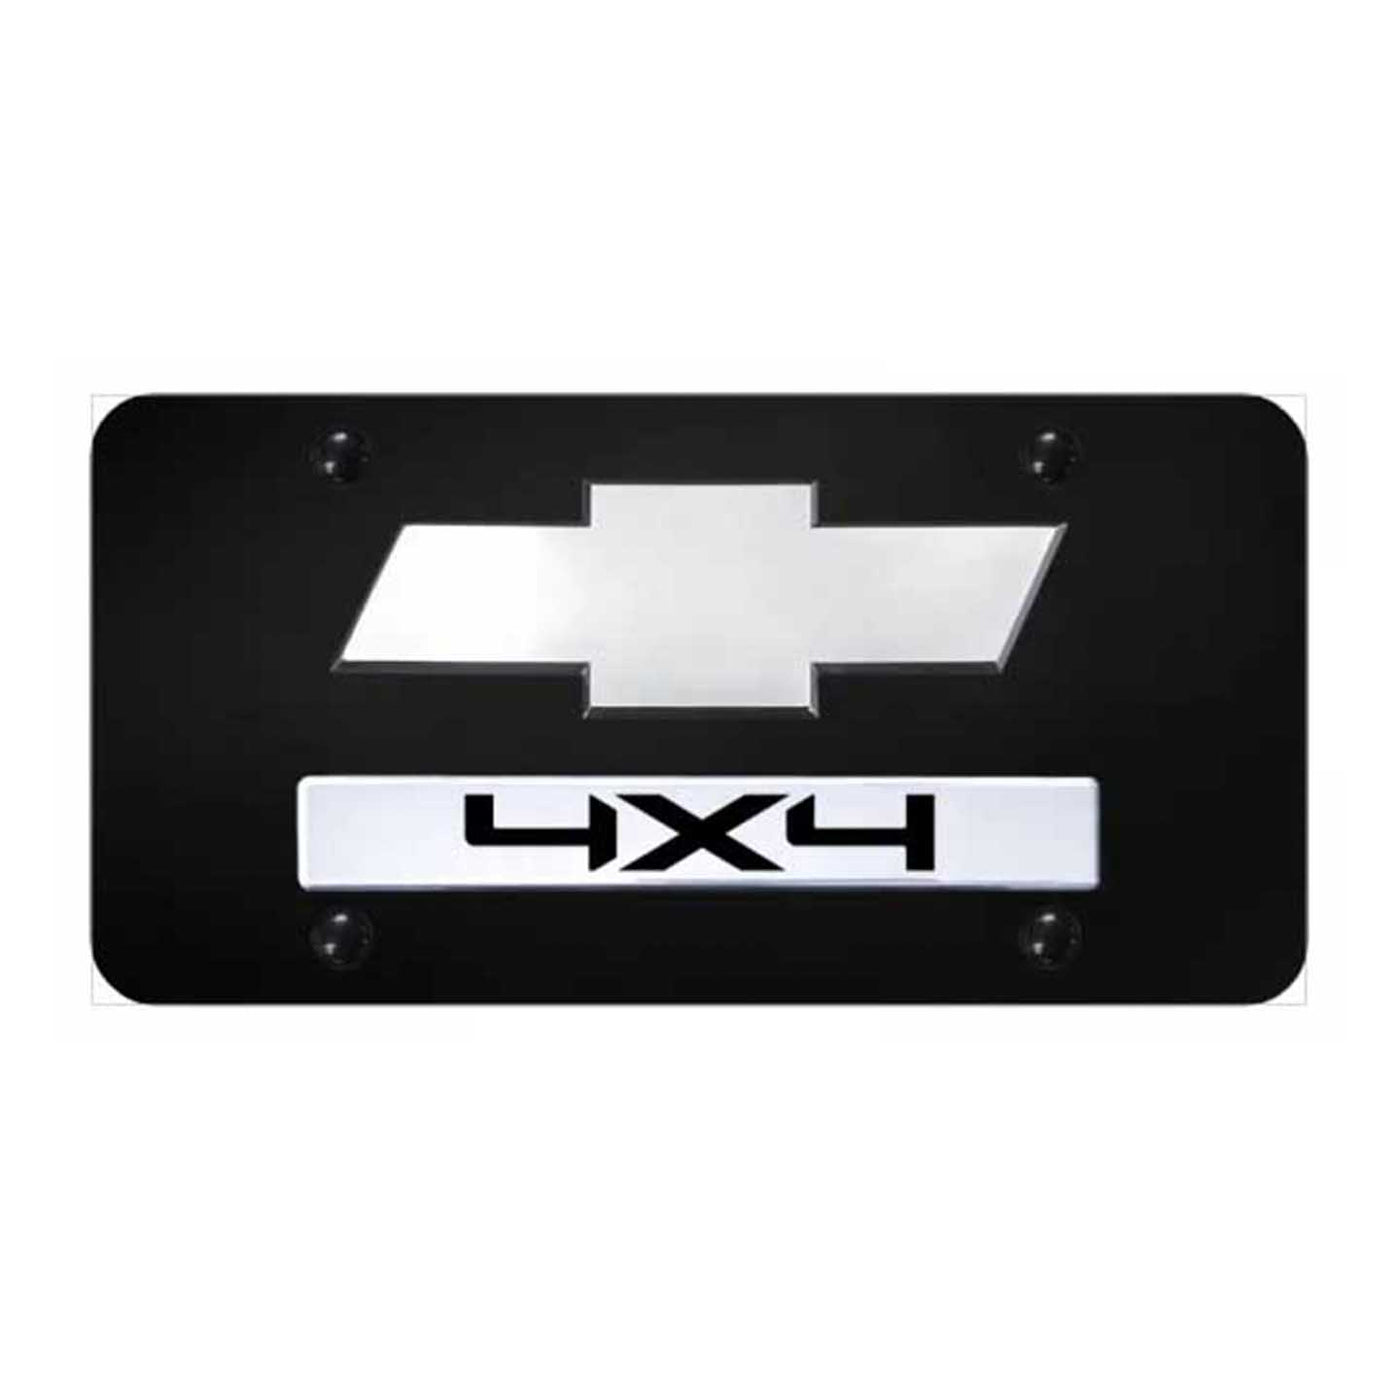 Dual Chevy/4X4 (New) License Plate - Chrome on Black